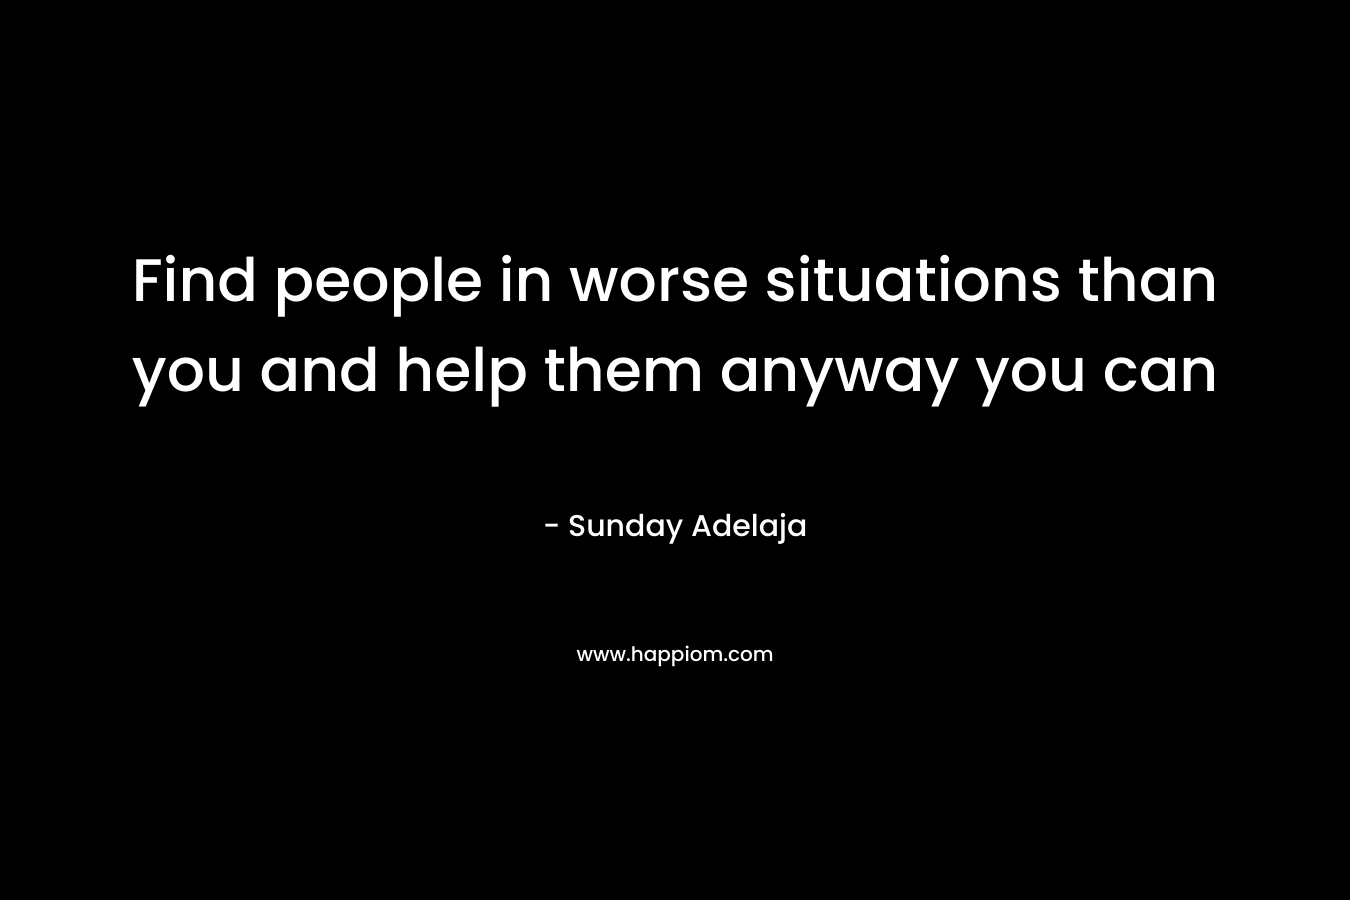 Find people in worse situations than you and help them anyway you can